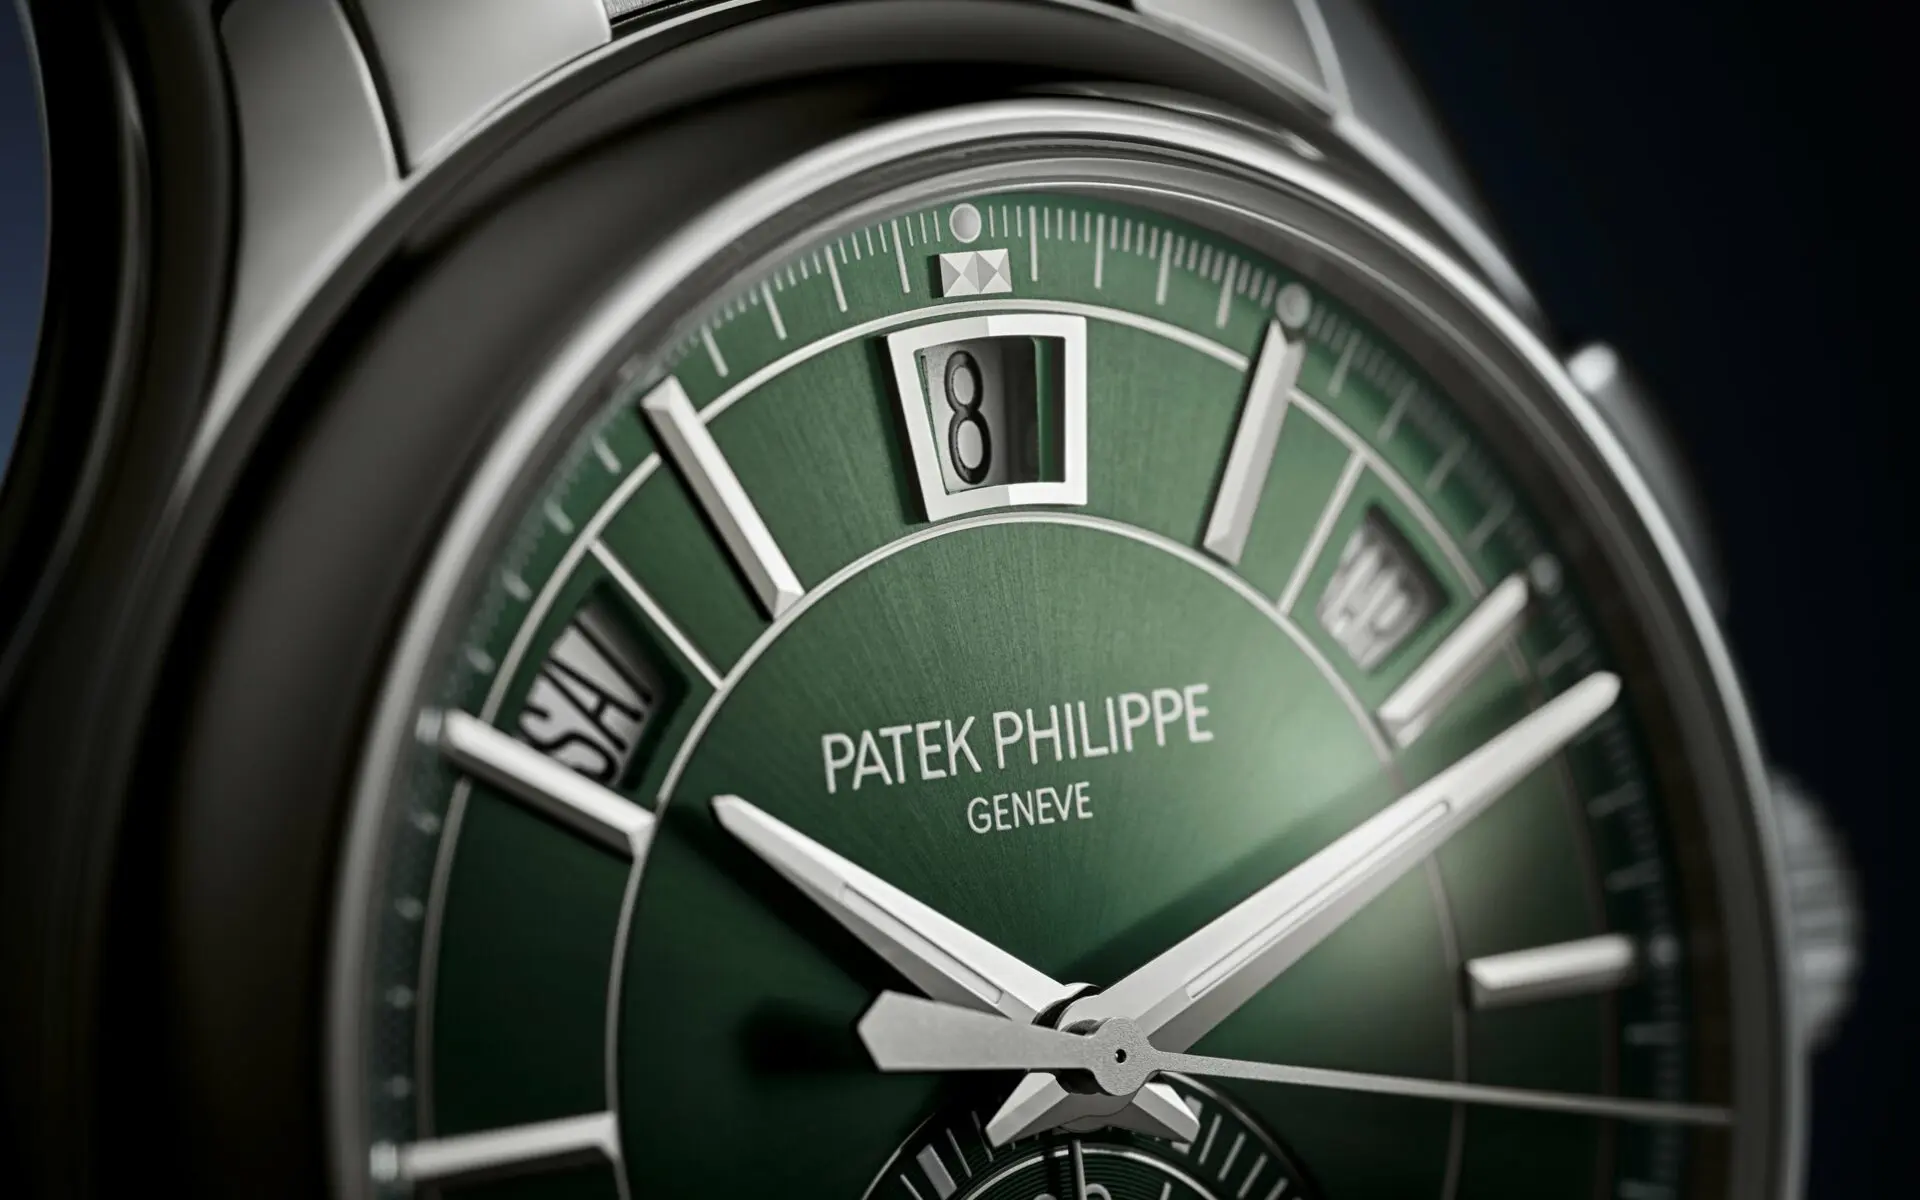 Review: Patek Philippe Ref. 6119 - a new reference for the entry